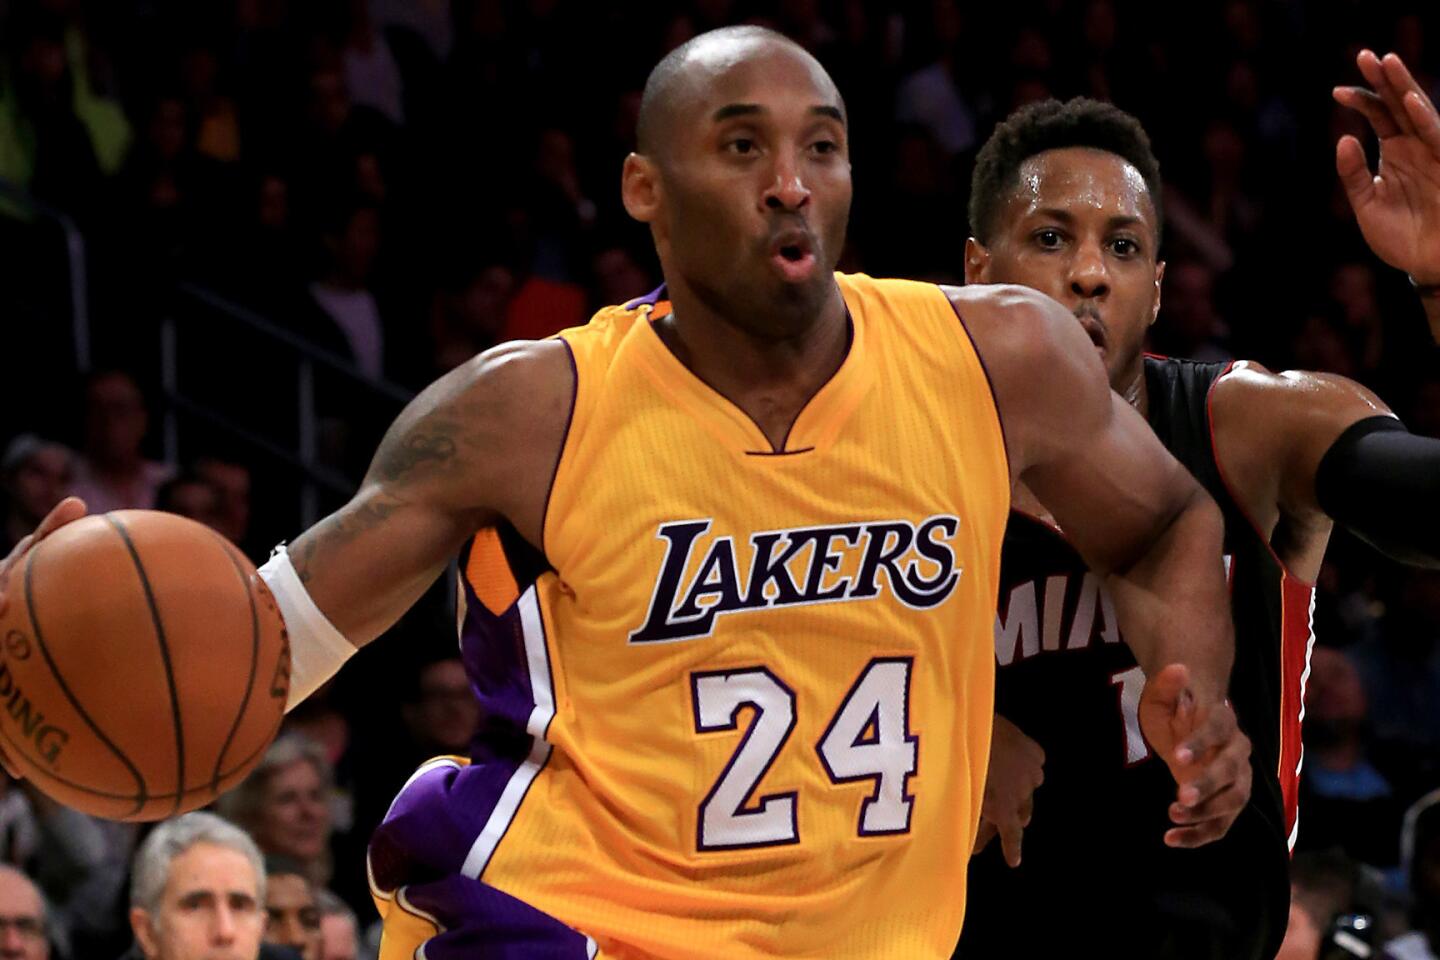 Kobe Bryant Was a Basketball Giant. But It Was His Dedication That Made Him  a Legend.